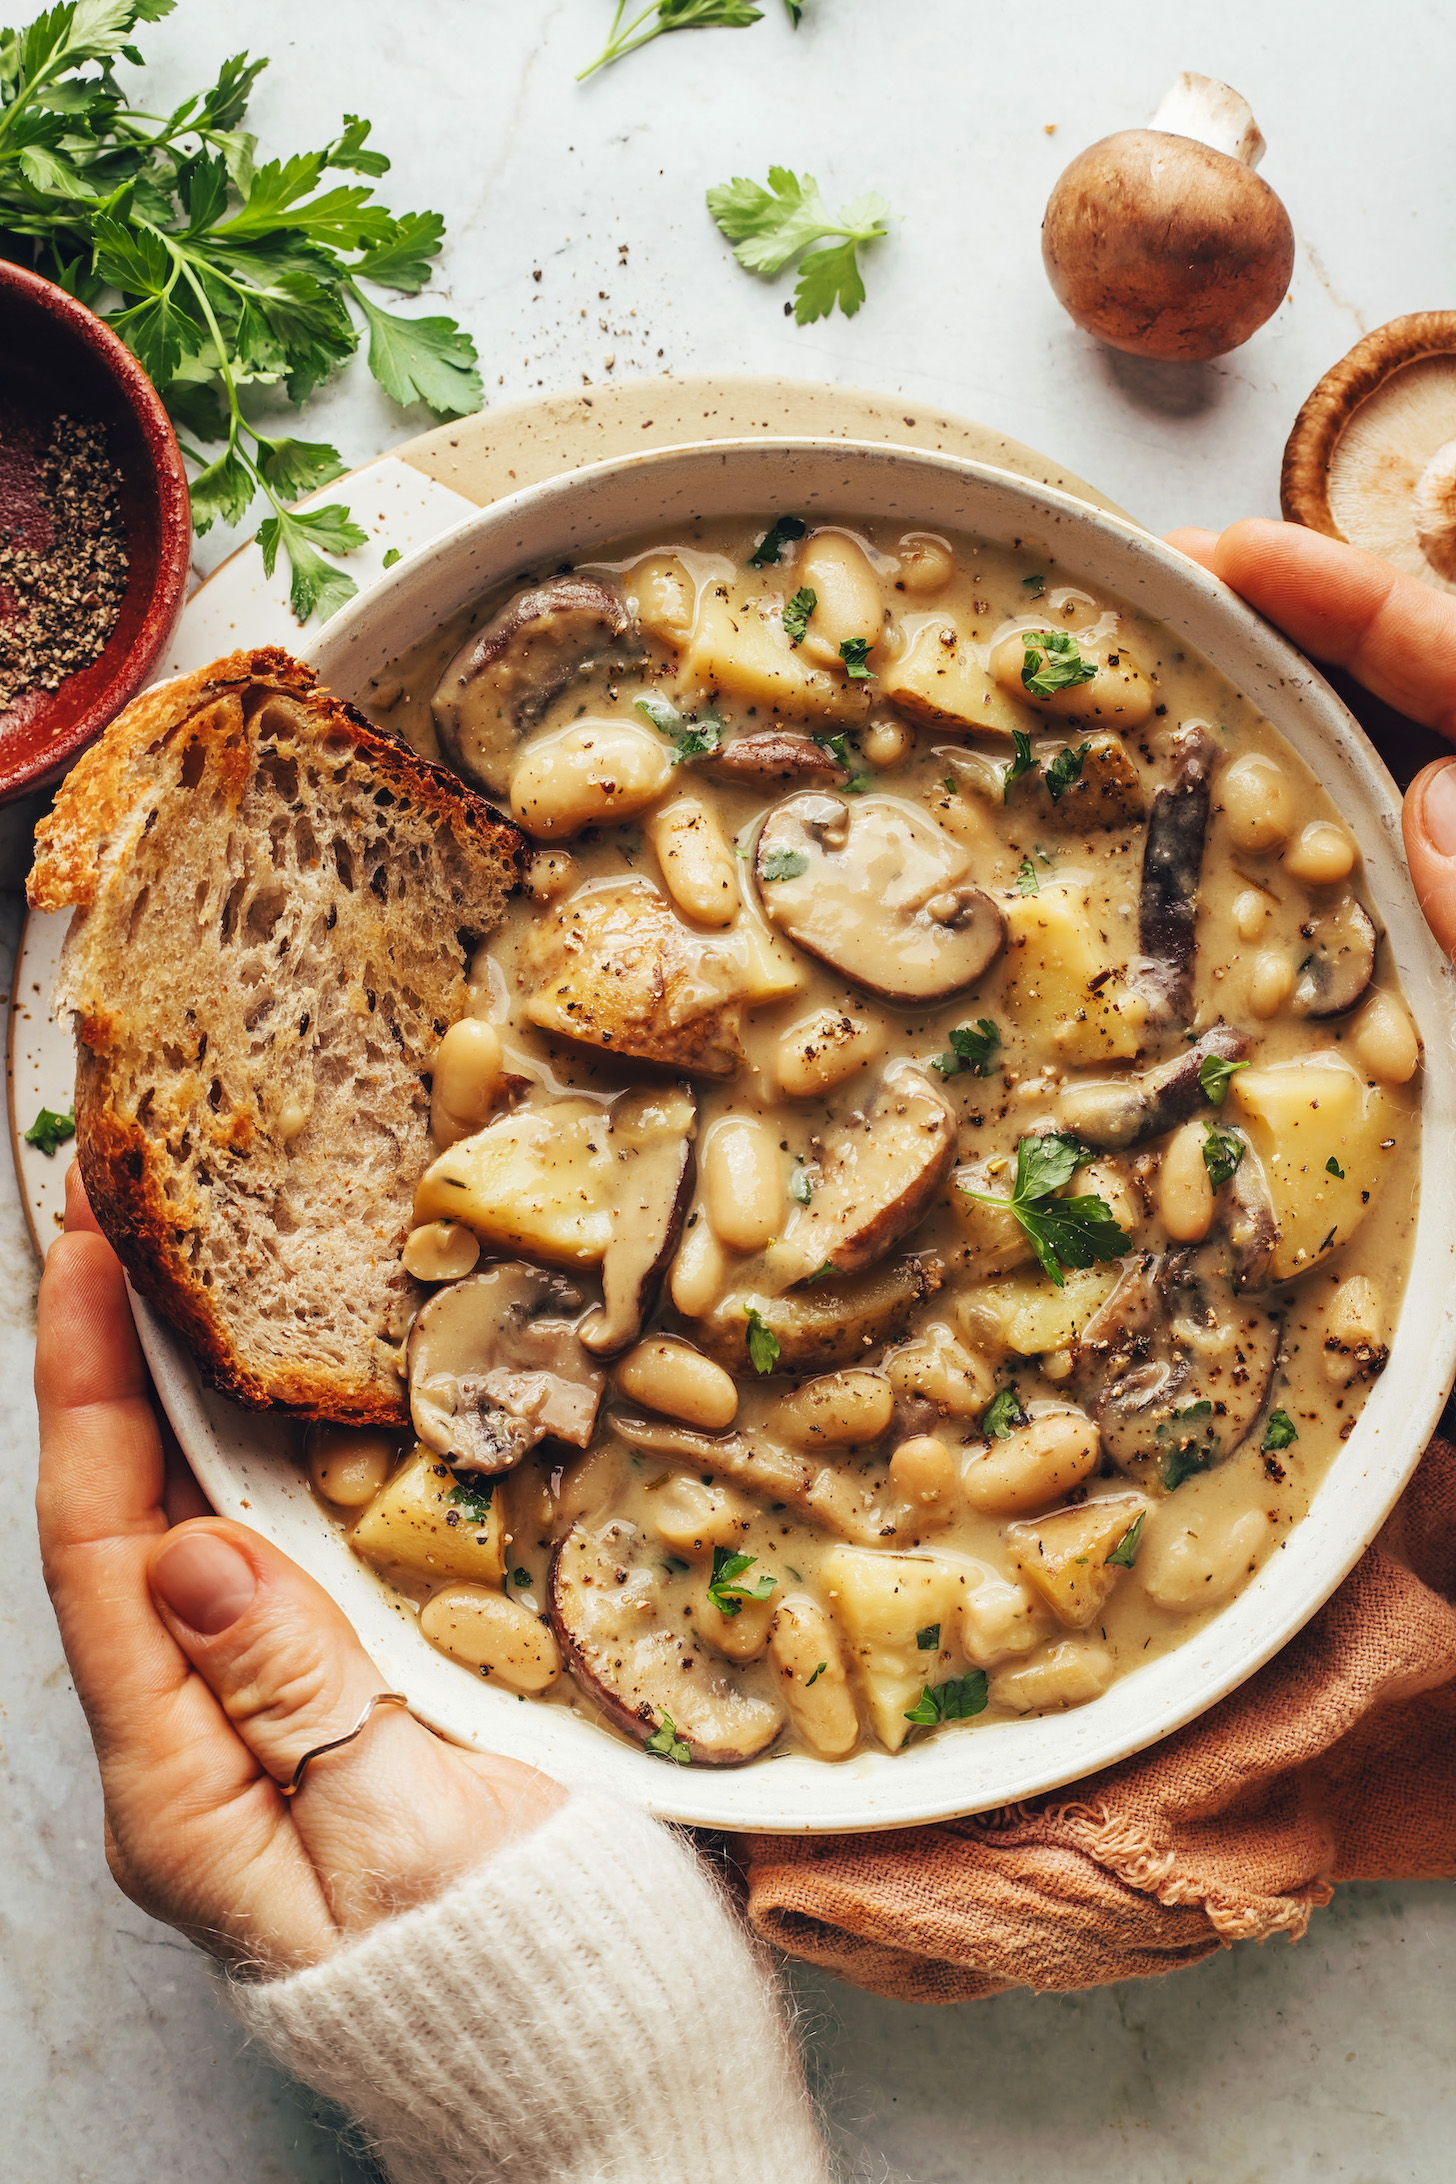 Hands holding a bowl of vegan white bean mushroom stew with a slice of toasted bread in it